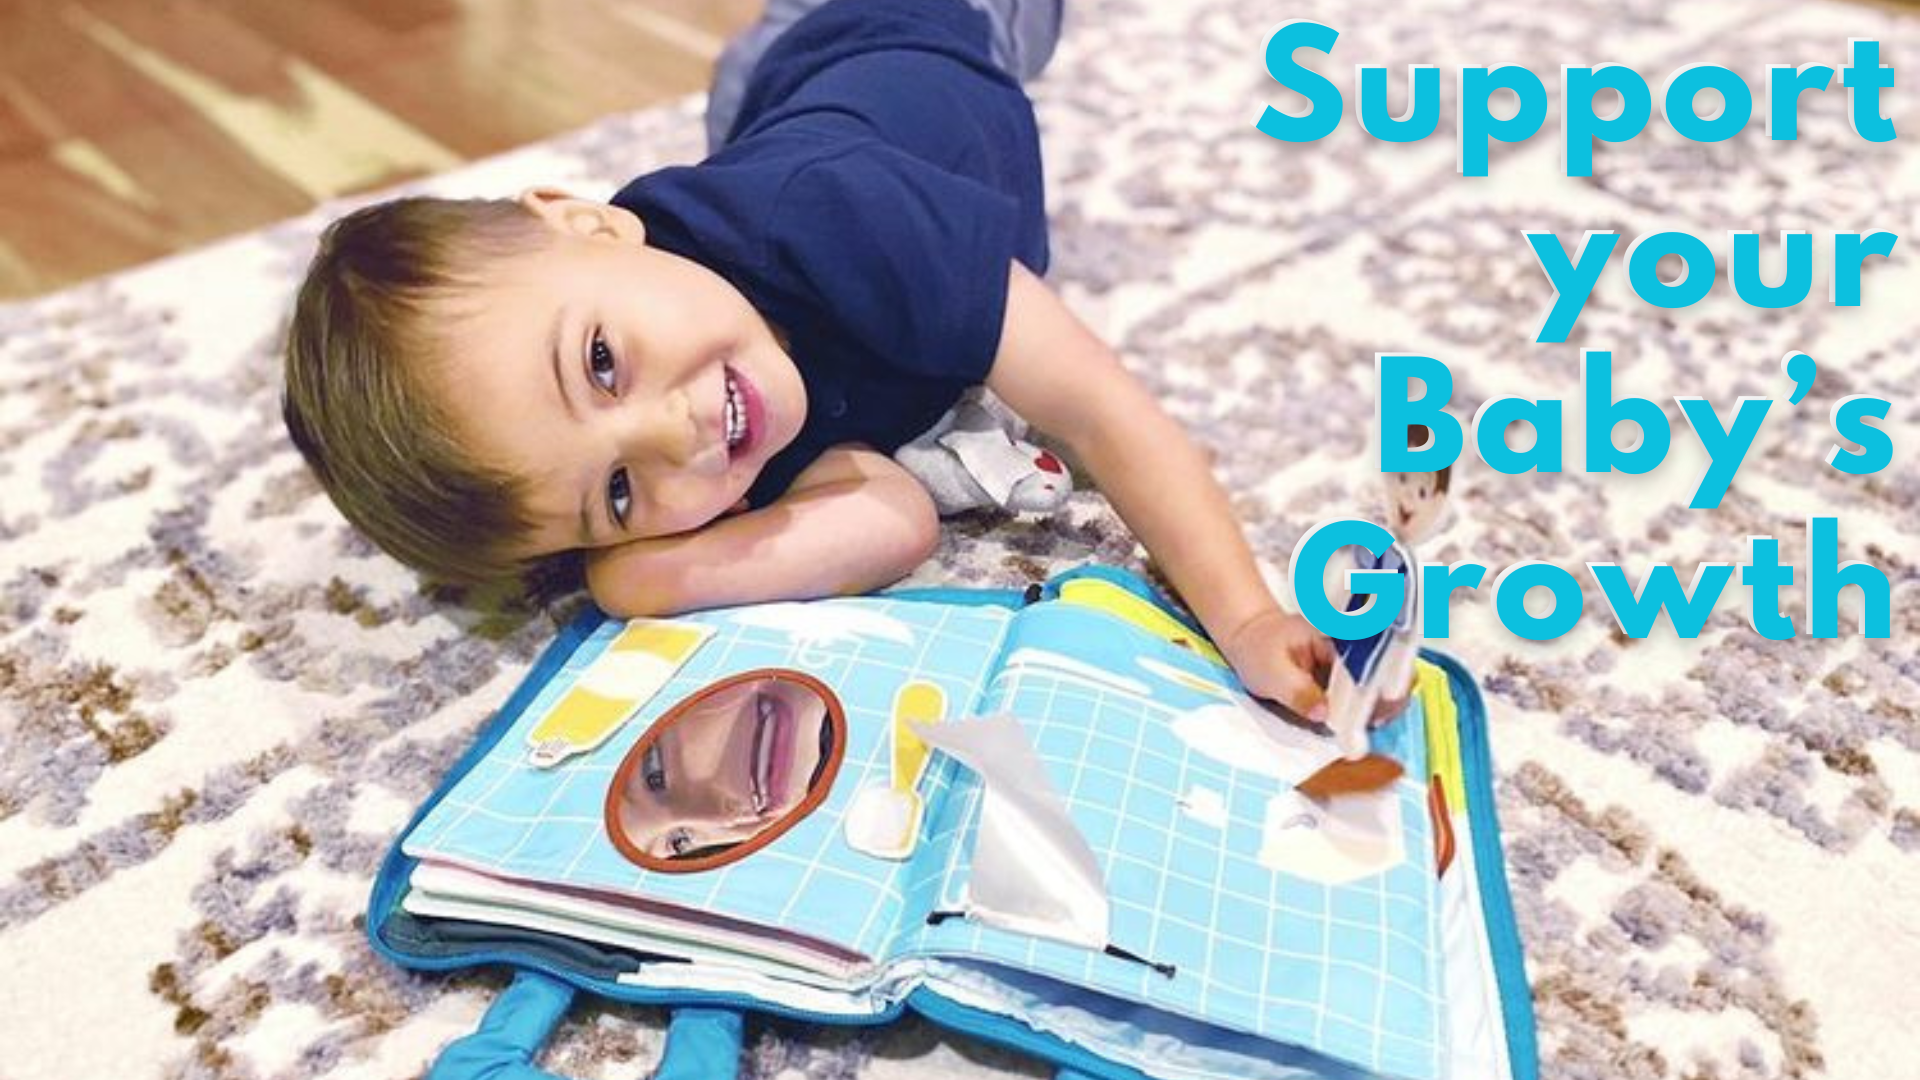 Build The Foundation: The Resources You Need To Support Your Thriving 12-Month-Old Baby